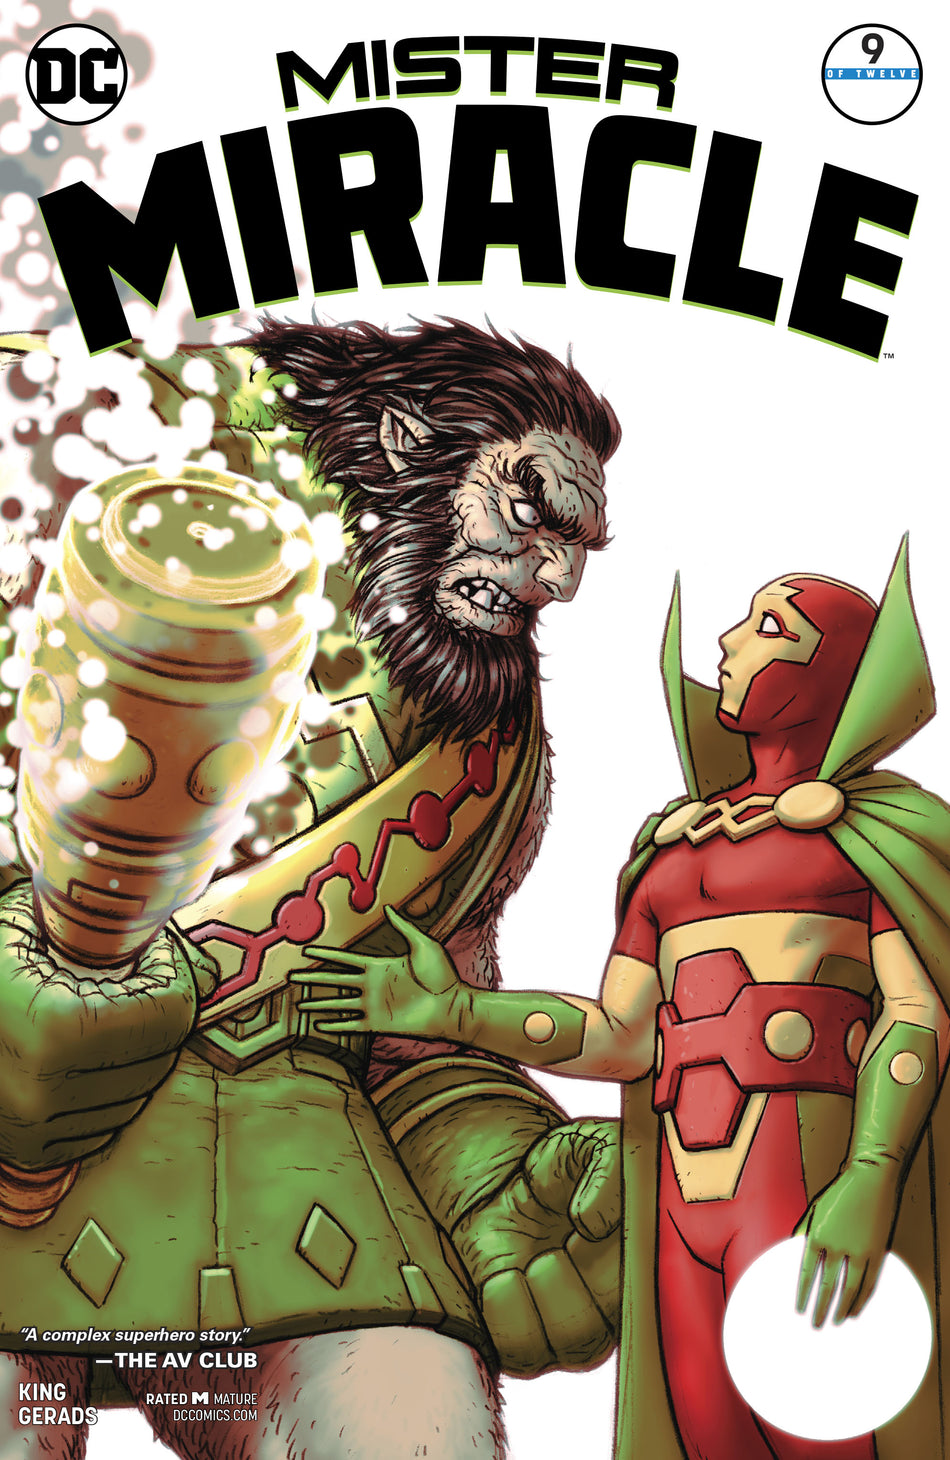 Photo of Mister Miracle Issue 9 (of 12) comic sold by Stronghold Collectibles